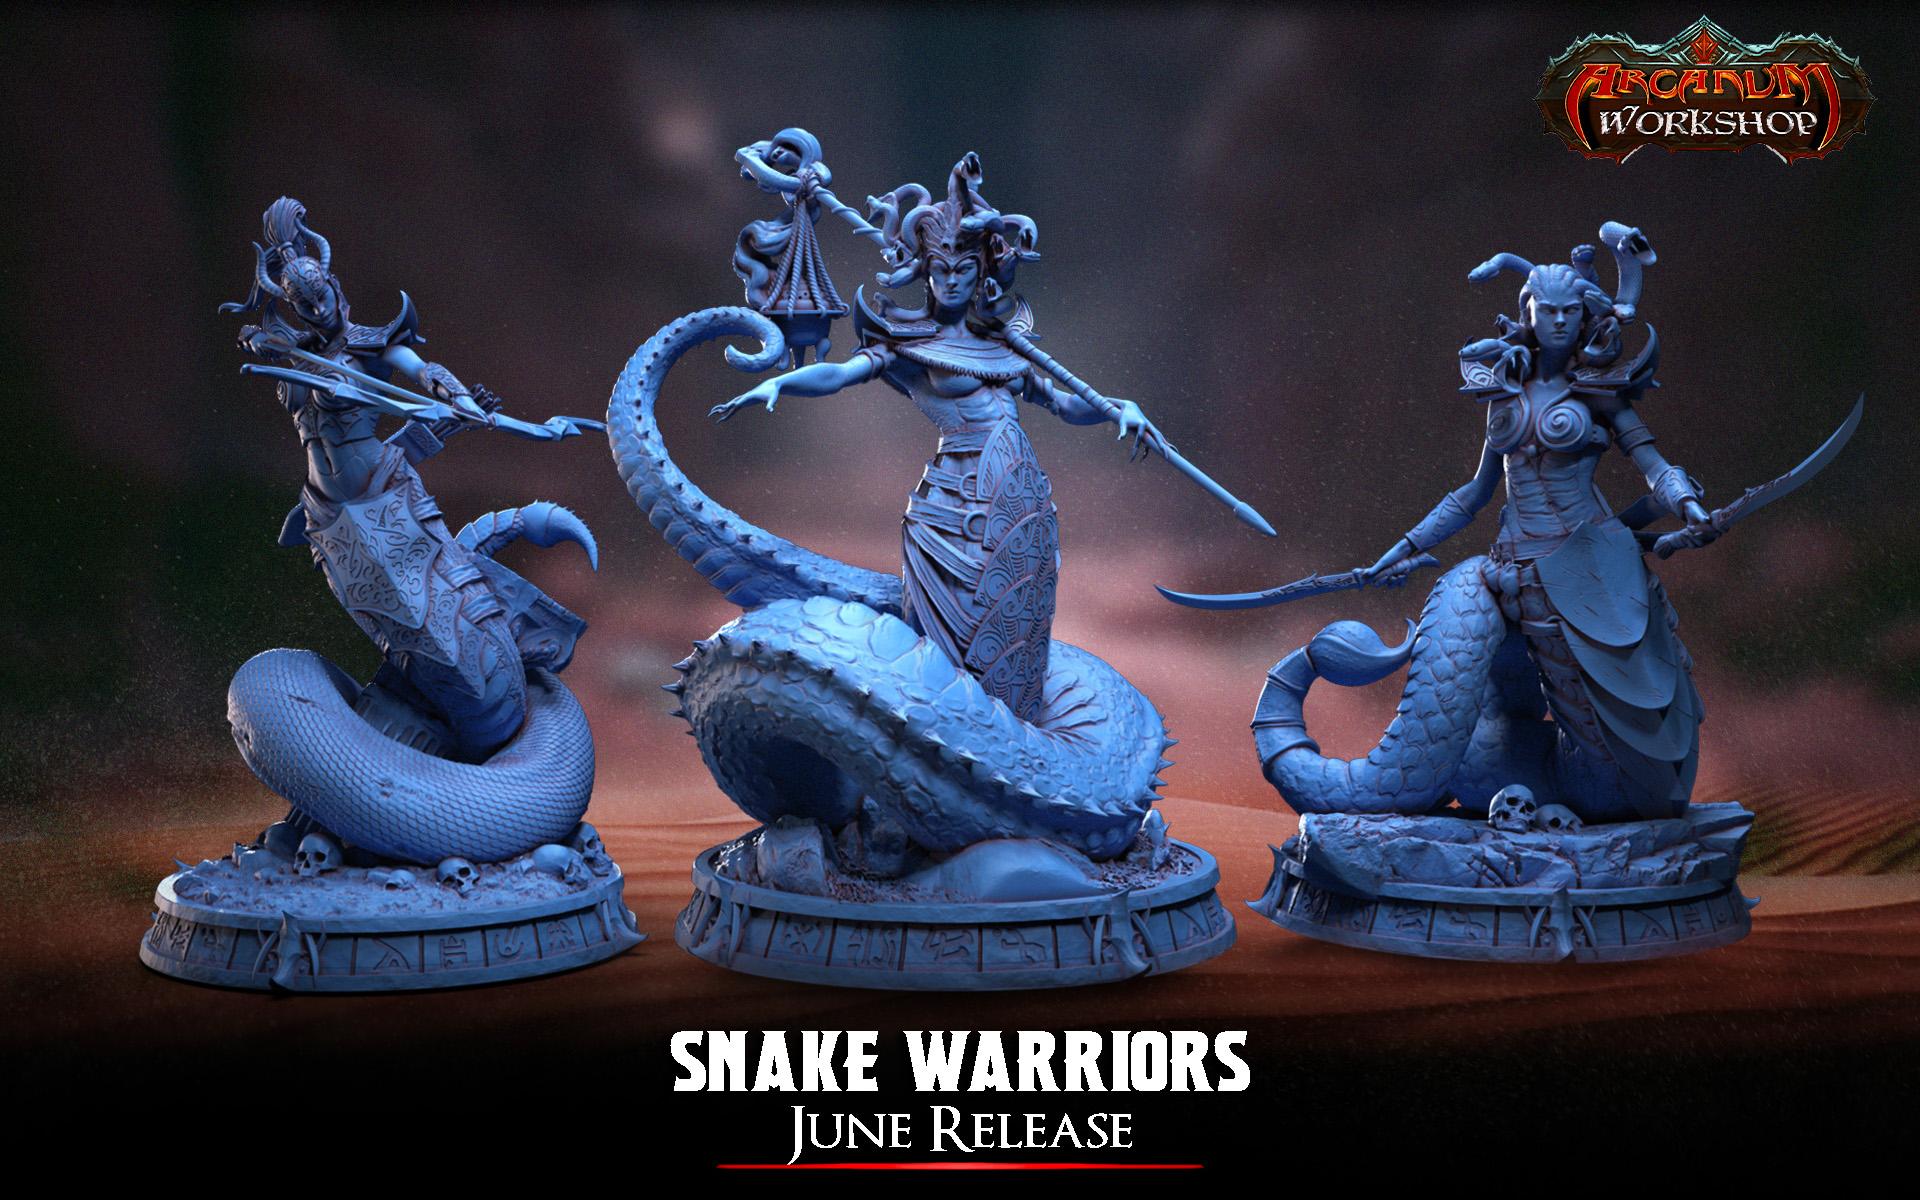 Snake Warriors Preview (June Release)